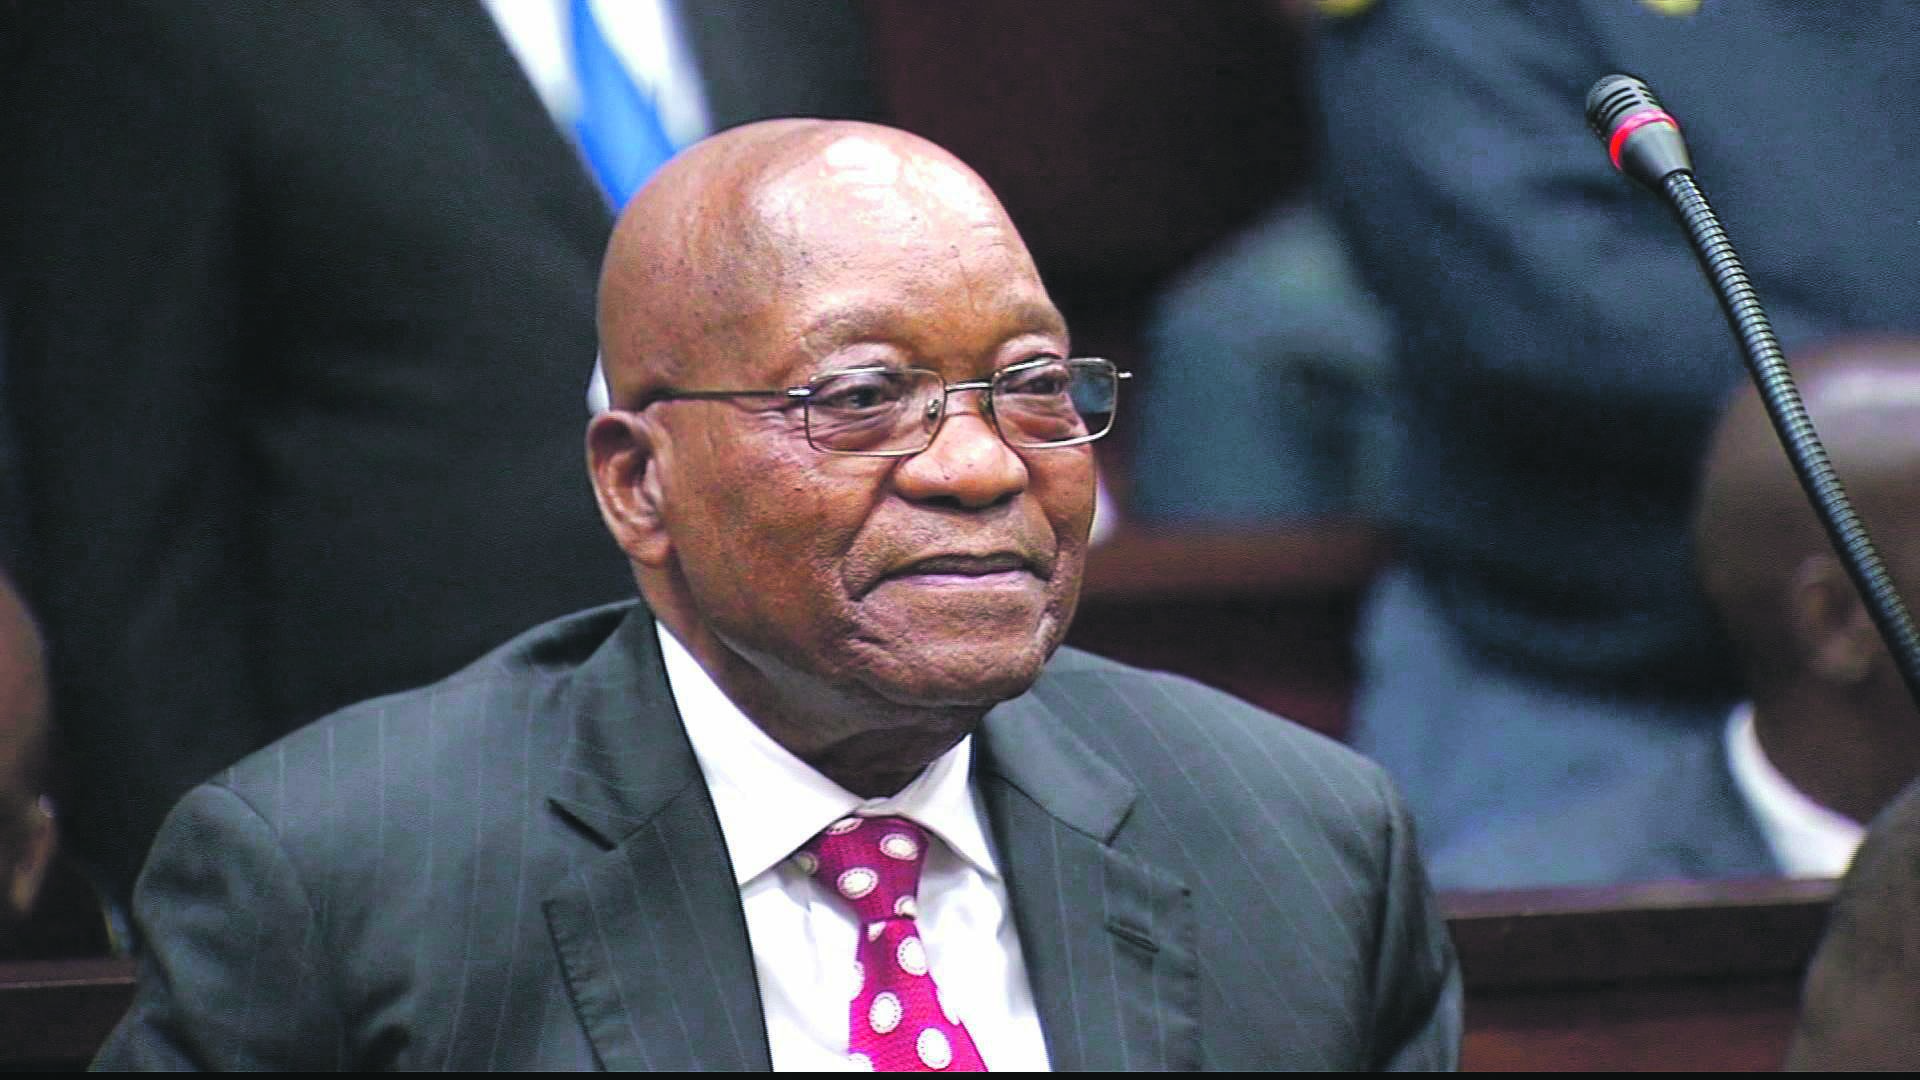 Supporters welcome Zuma appeal ruling | Witness